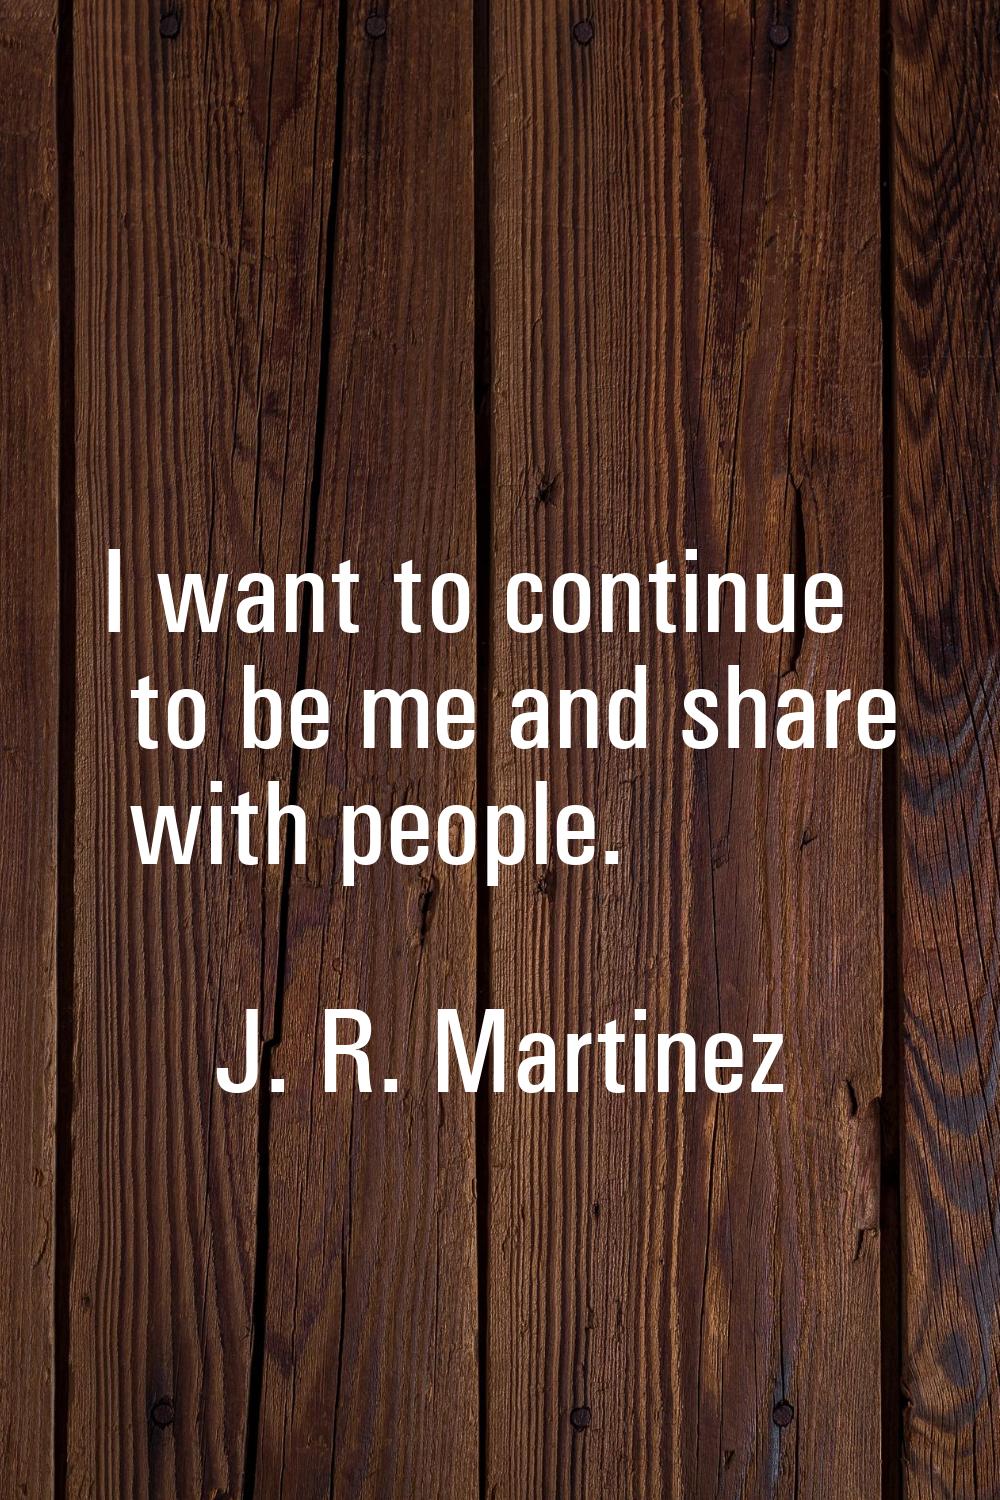 I want to continue to be me and share with people.